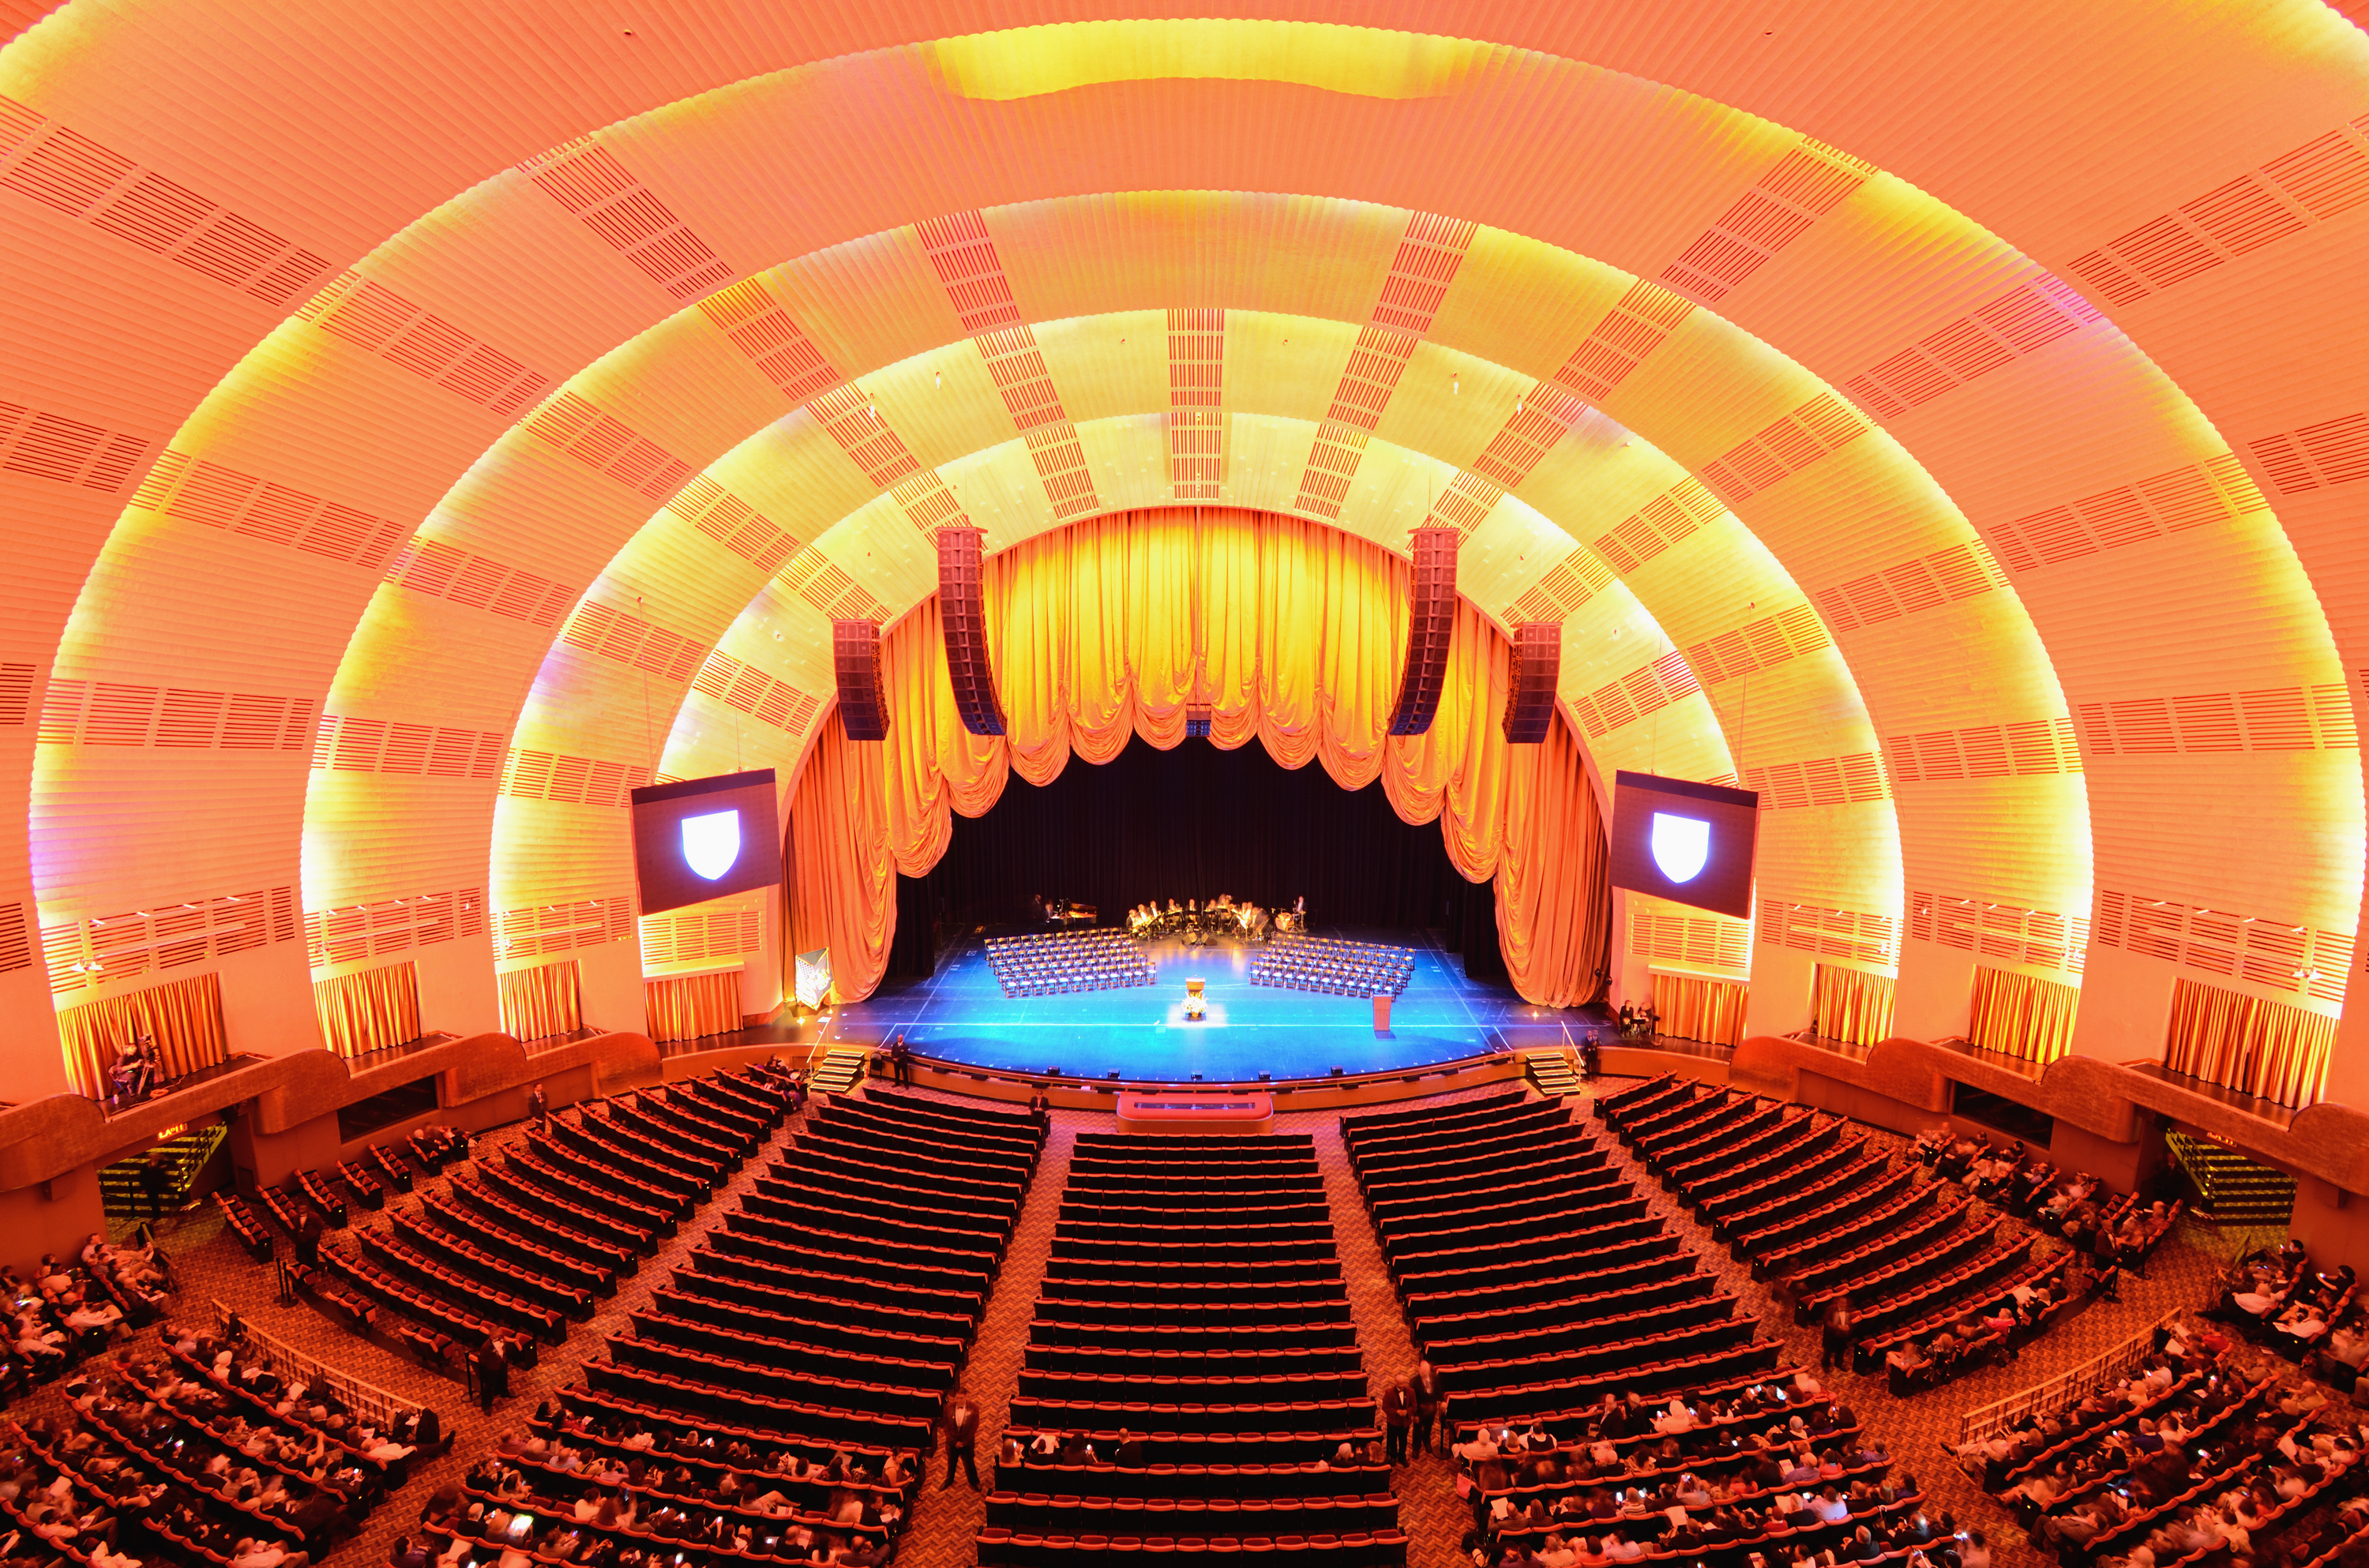 NYC's Radio City Music Hall was just ranked one of the most beautiful  theaters in the world